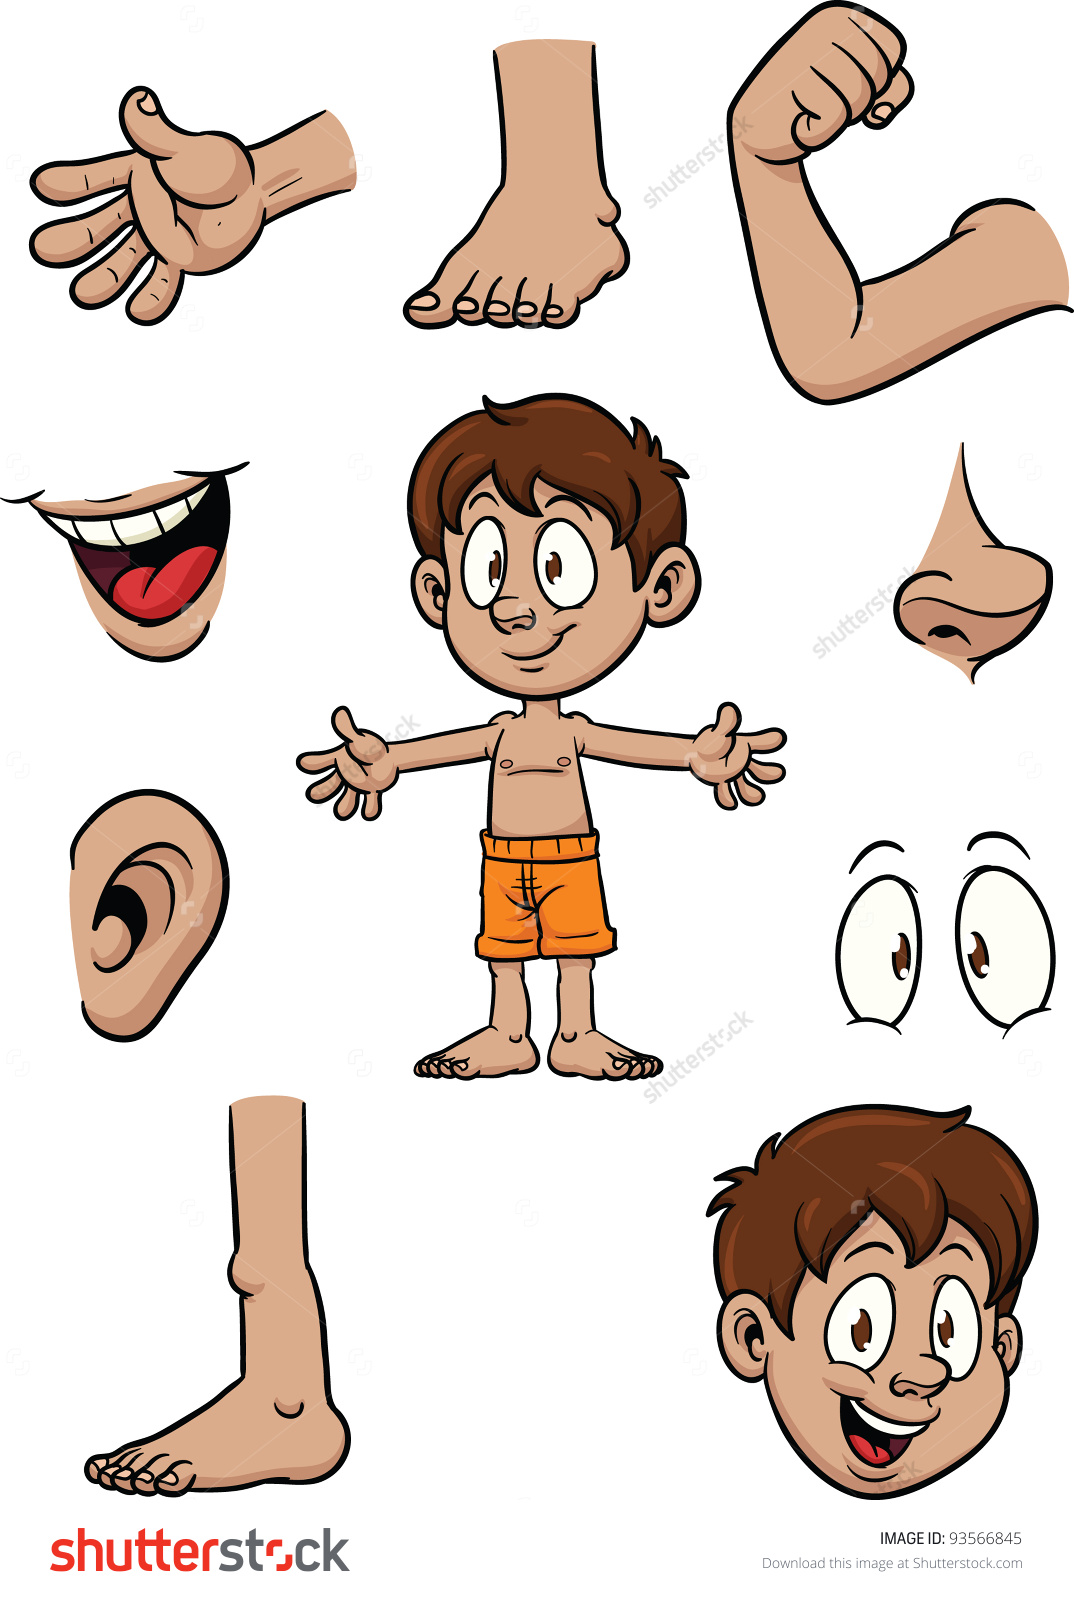 face parts body clipart - Clipground